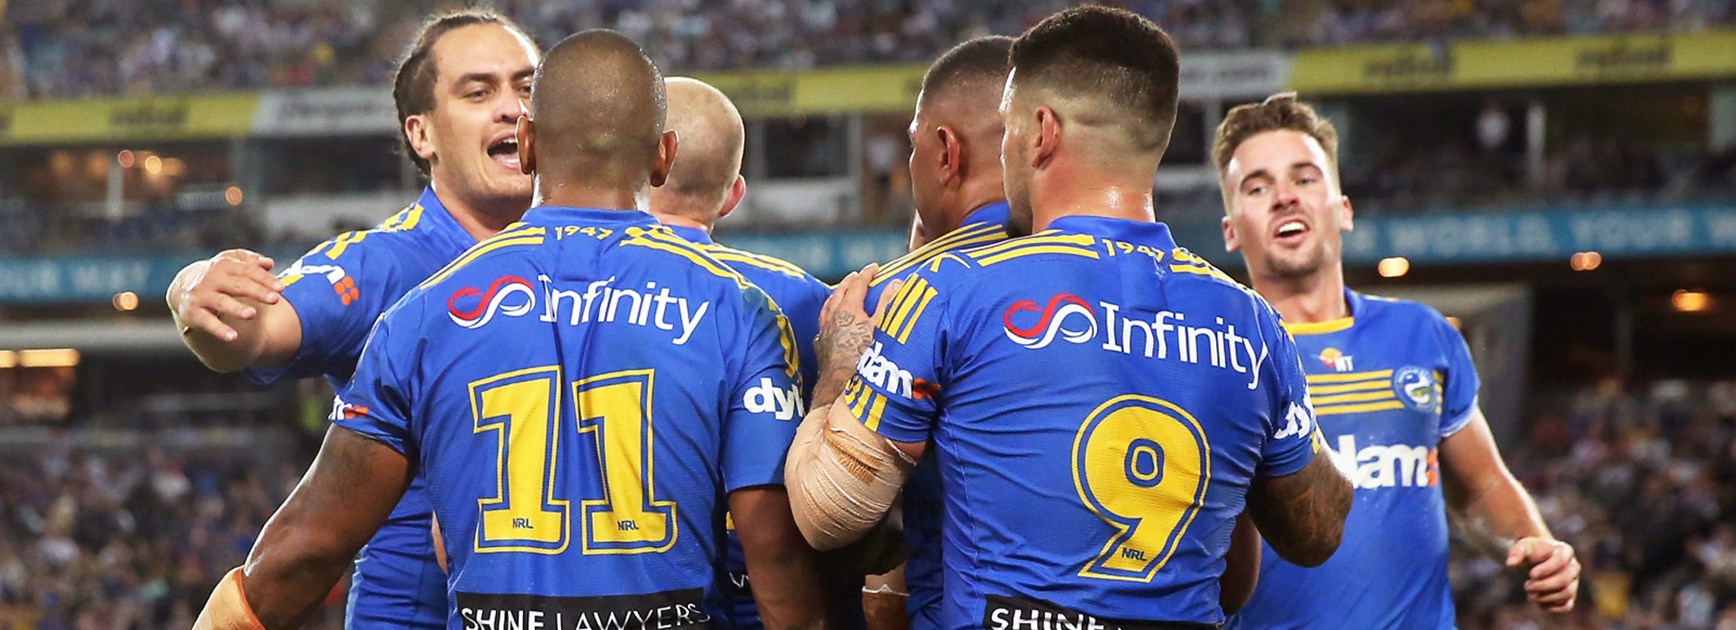 Eels players celebrate a try against the Bulldogs in Round 9.